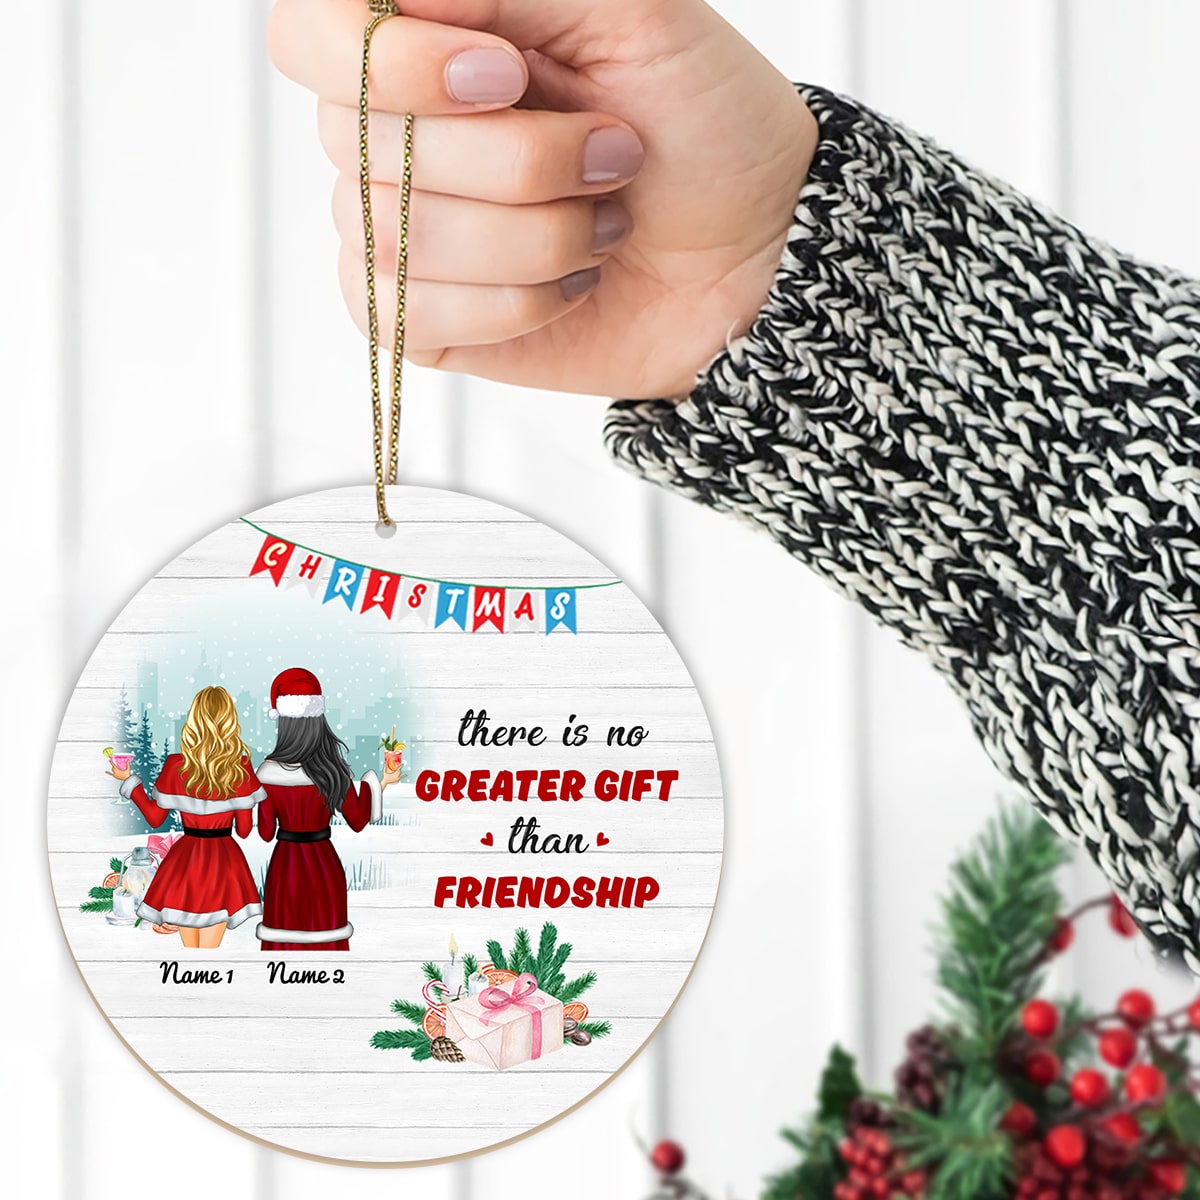 There's No Greater Gift Than Friendship Personalized Name Christmas Premium Ceramic Ornaments Sets